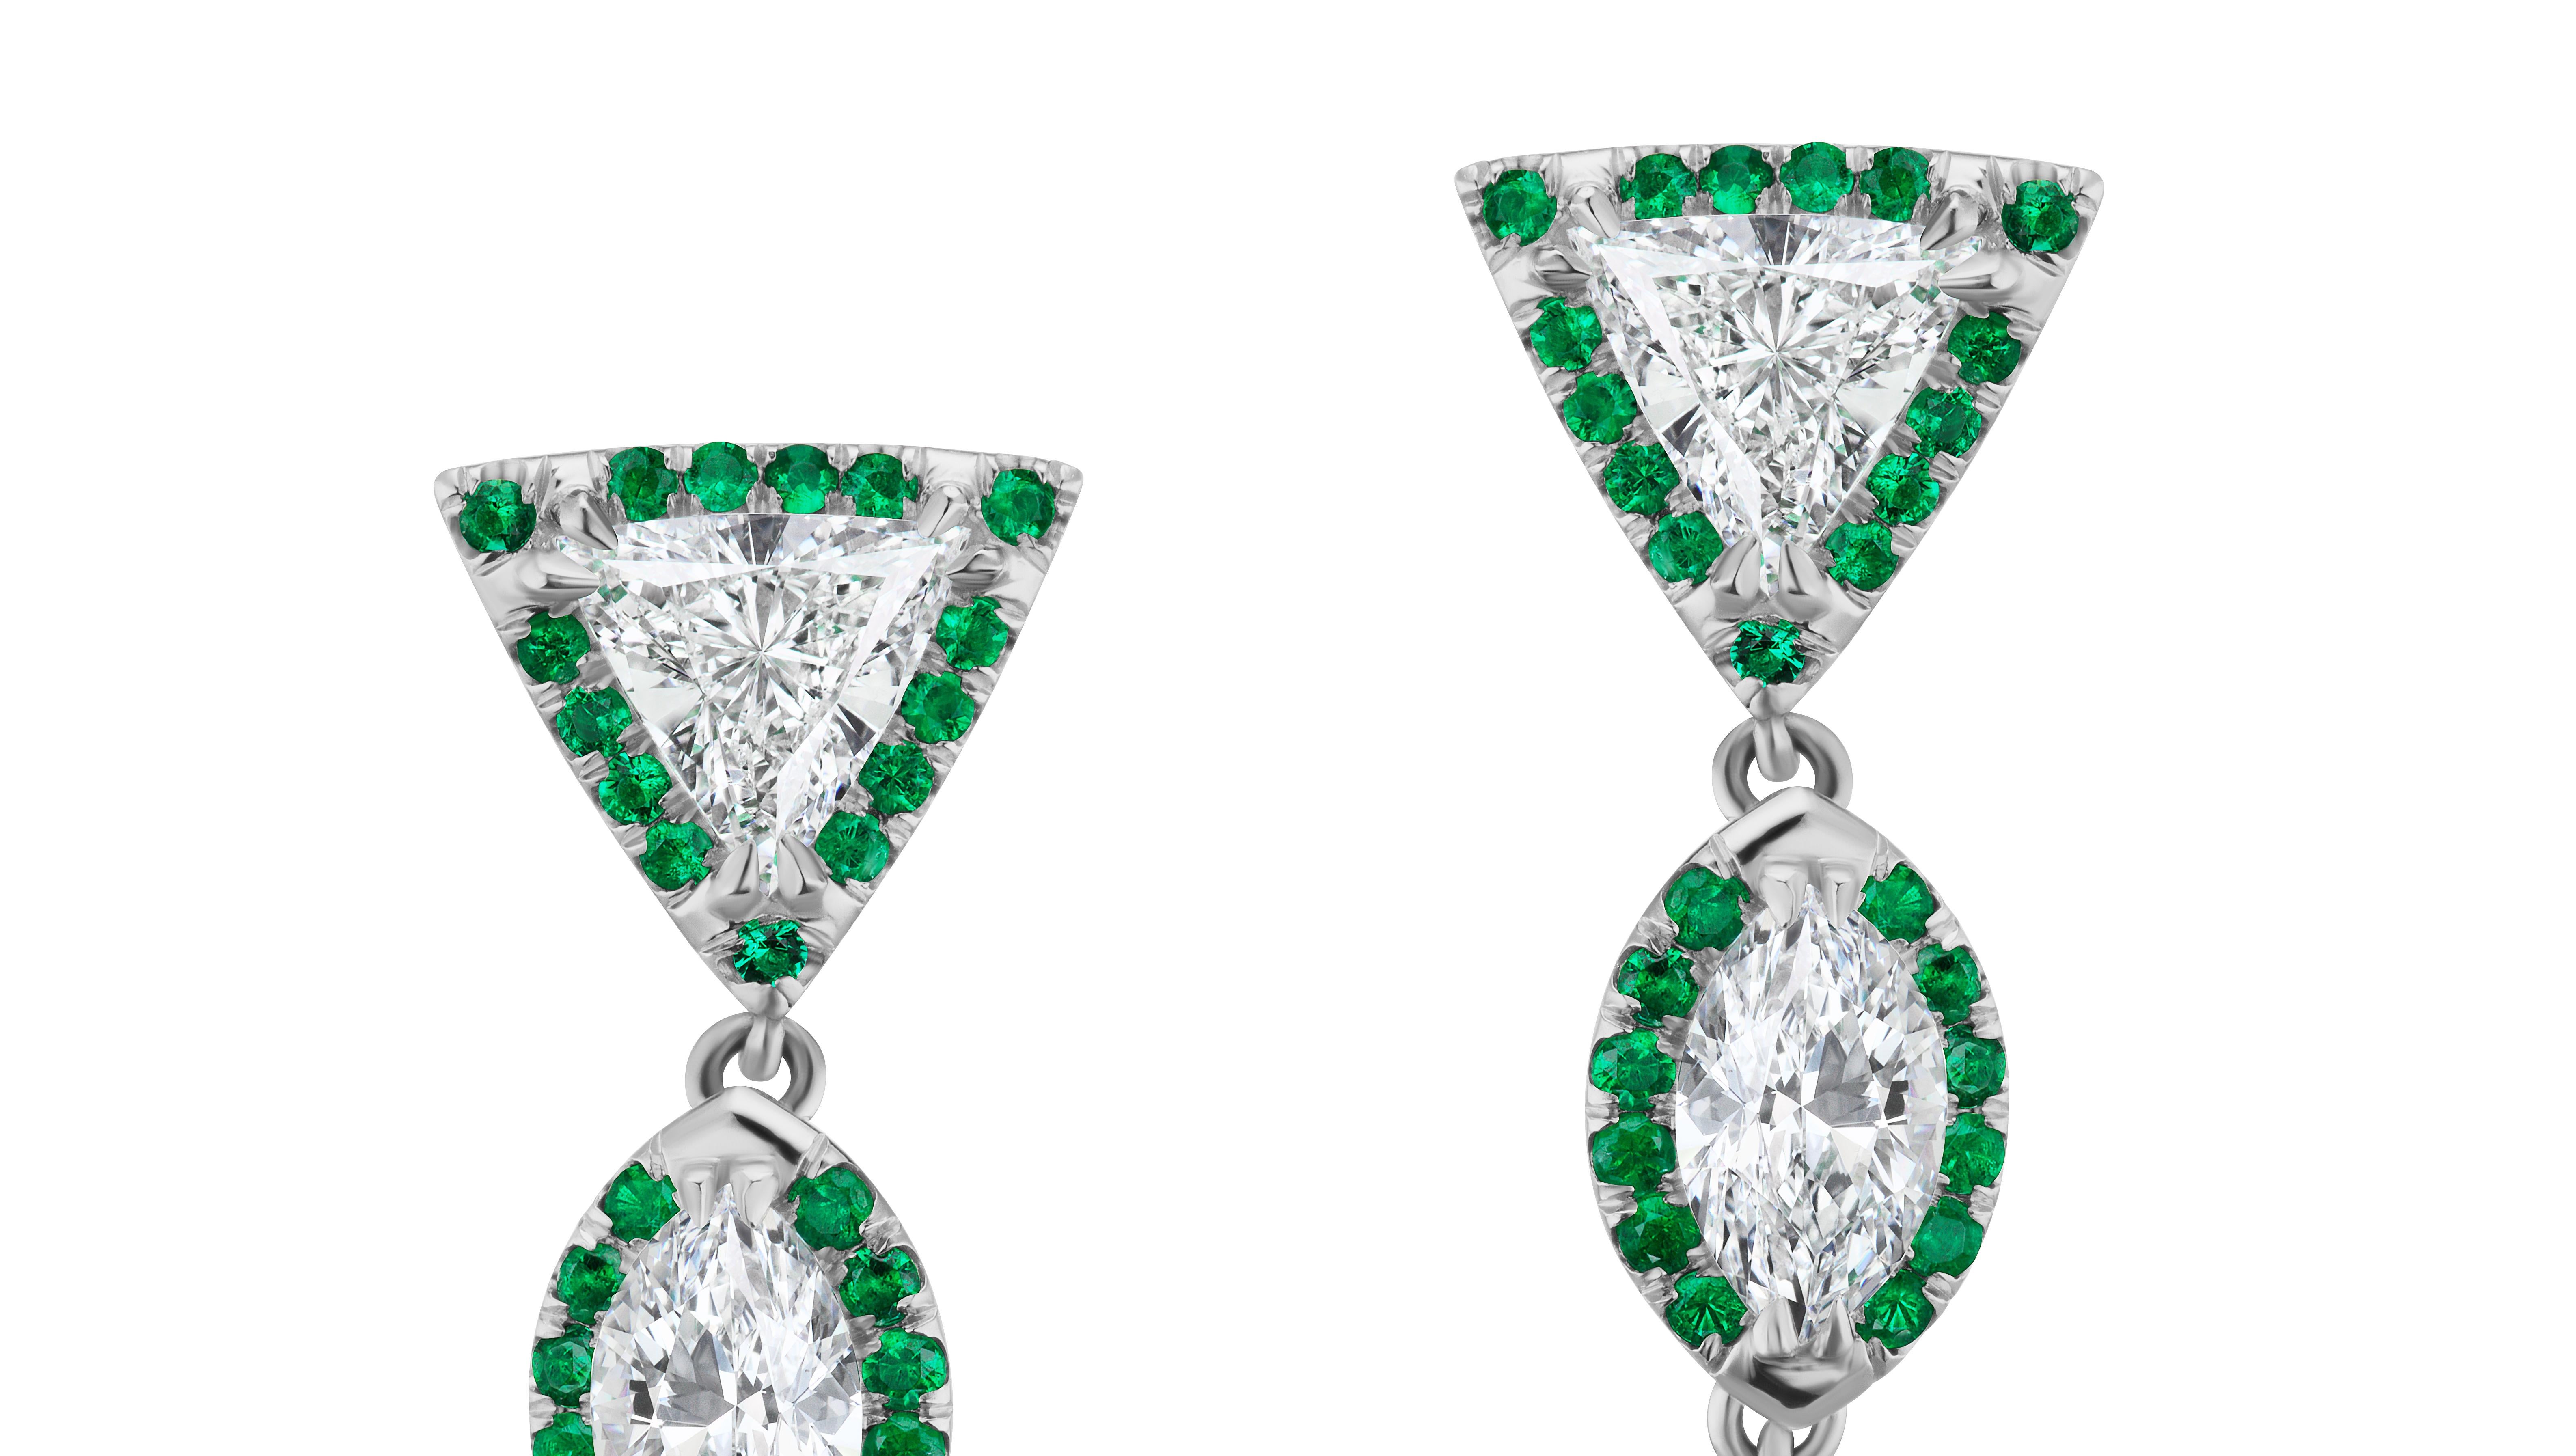 Unique and Fine Emerald Drop Earrings certified by AGL as Fancy Shape for their unique cutting first seen.
One stone is hard to find and even cut. Two Stones is ultra rare. 
Detail and contrast throughout this earring.
Emeralds weigh 5.75